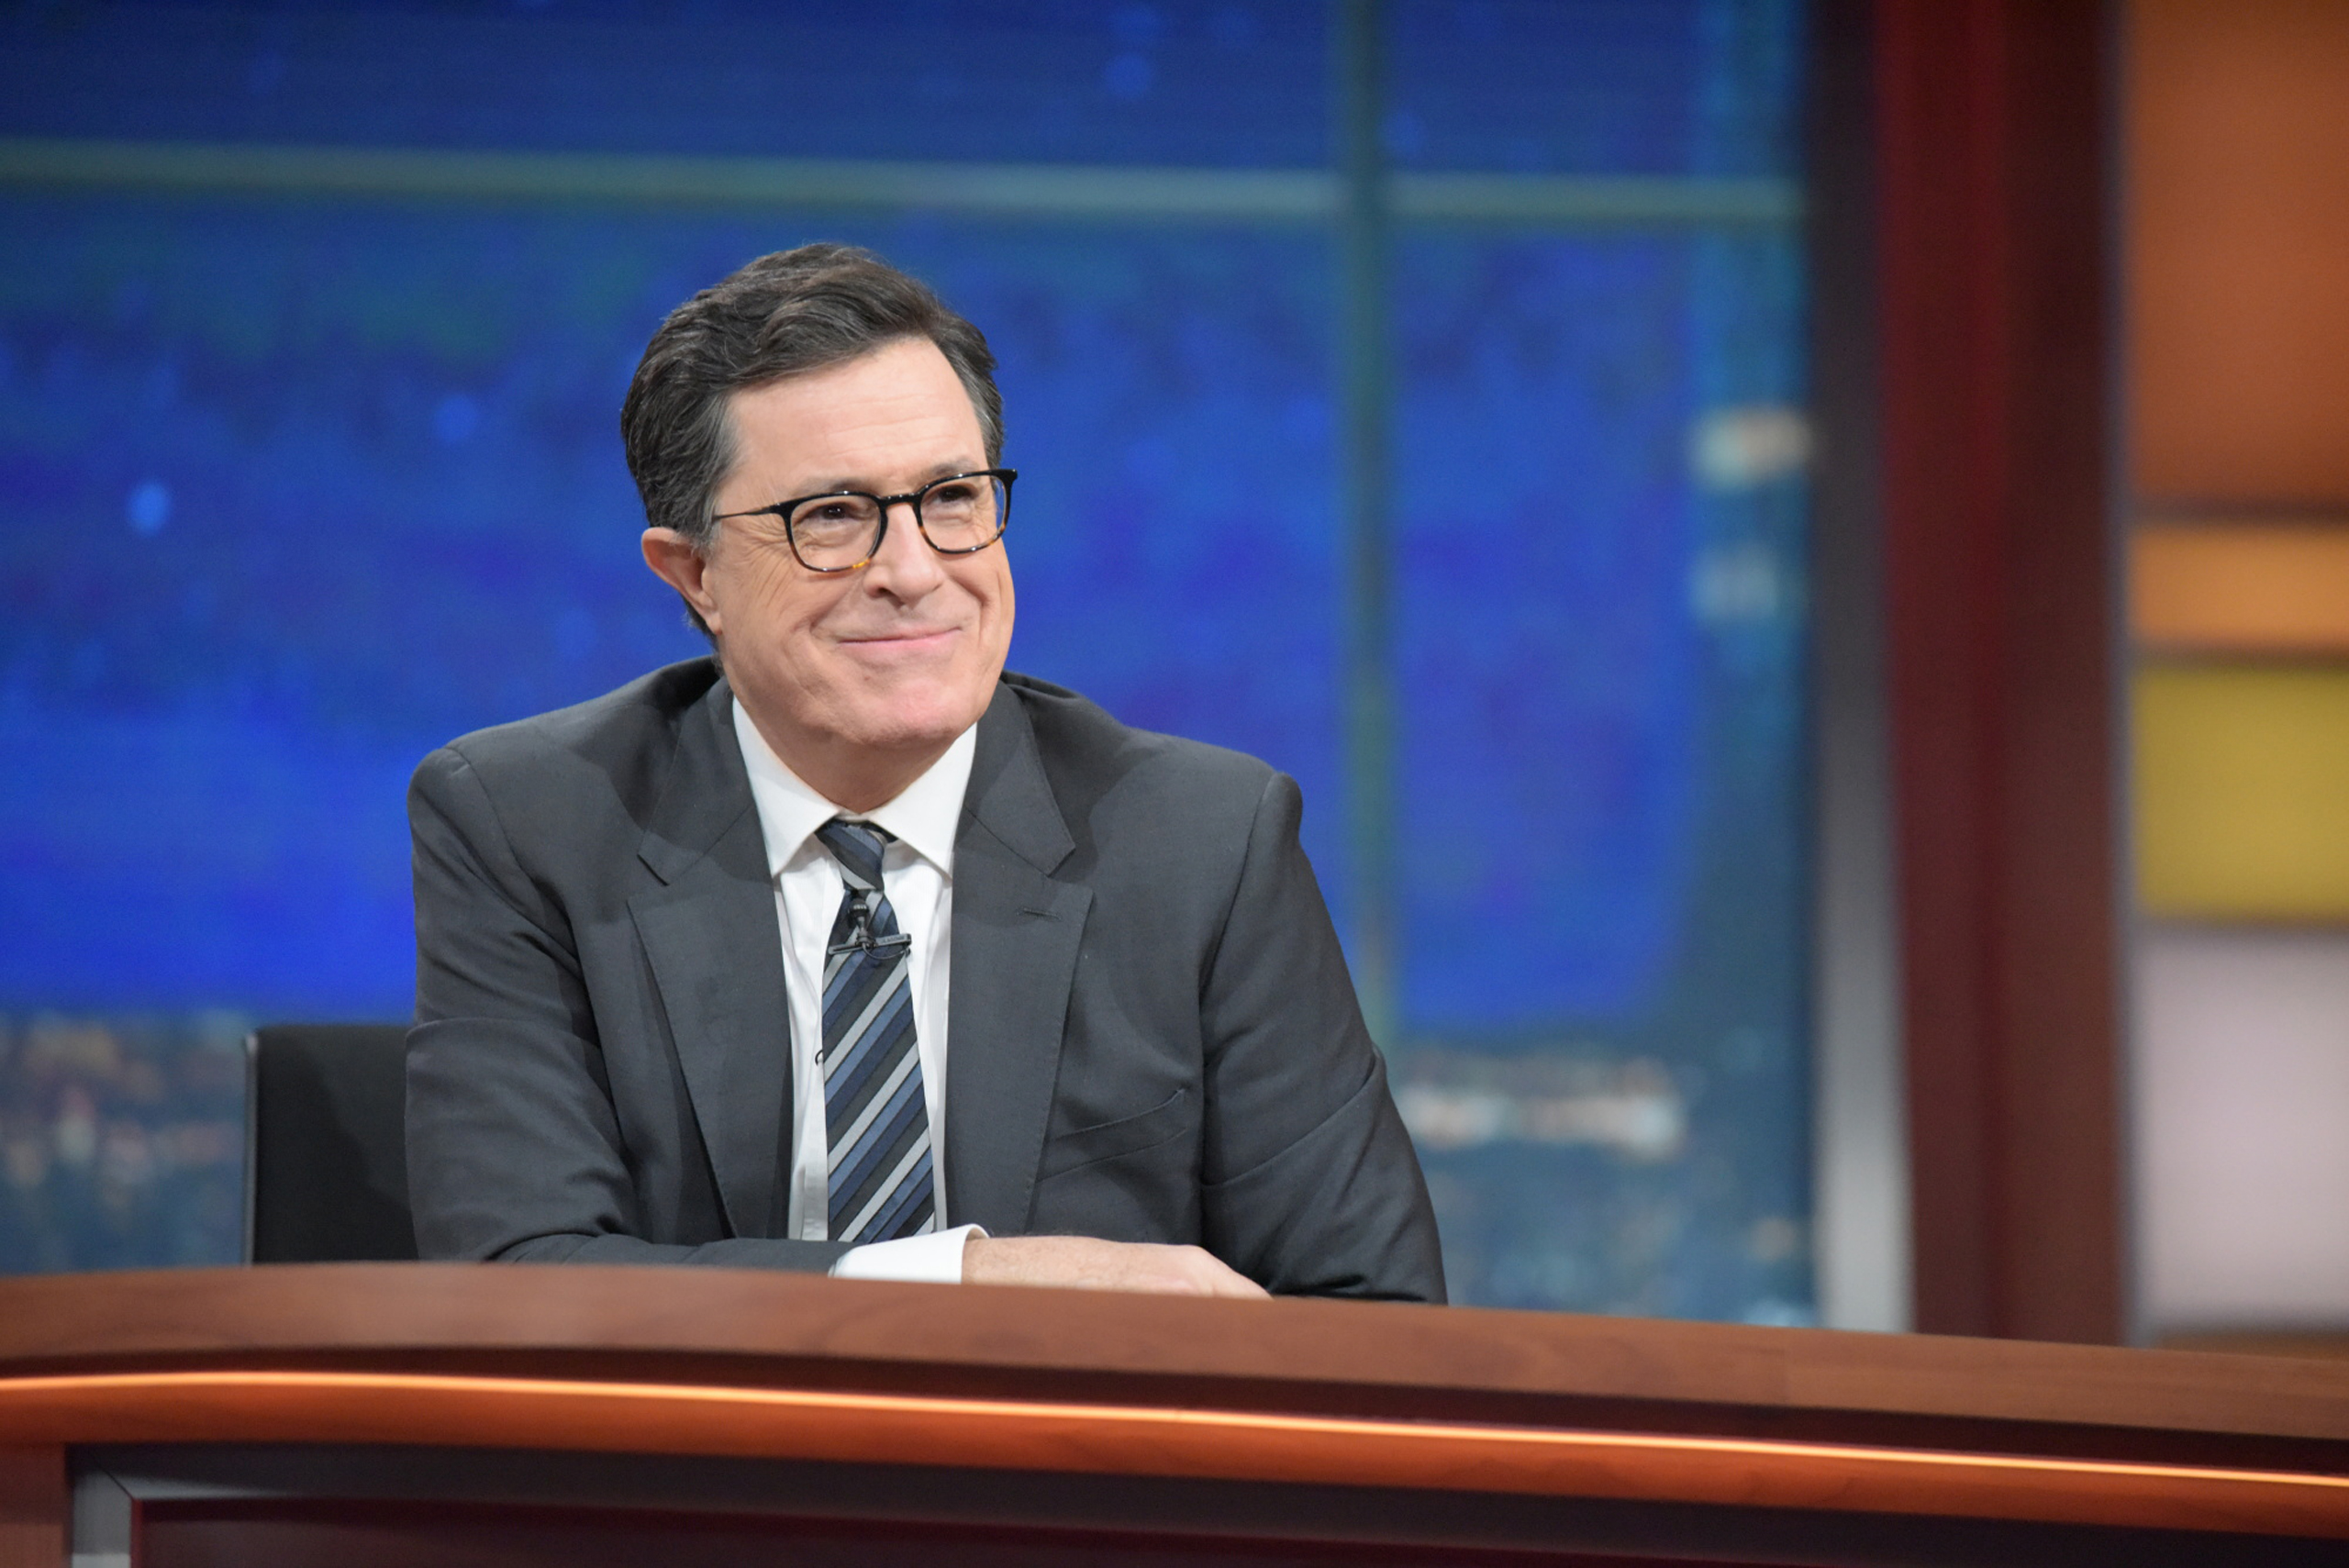 The Late Show with Stephen Colbert in New York on Dec. 15, 2016. (Scott Kowalchyk—CBS Photo Archive/Getty Images)